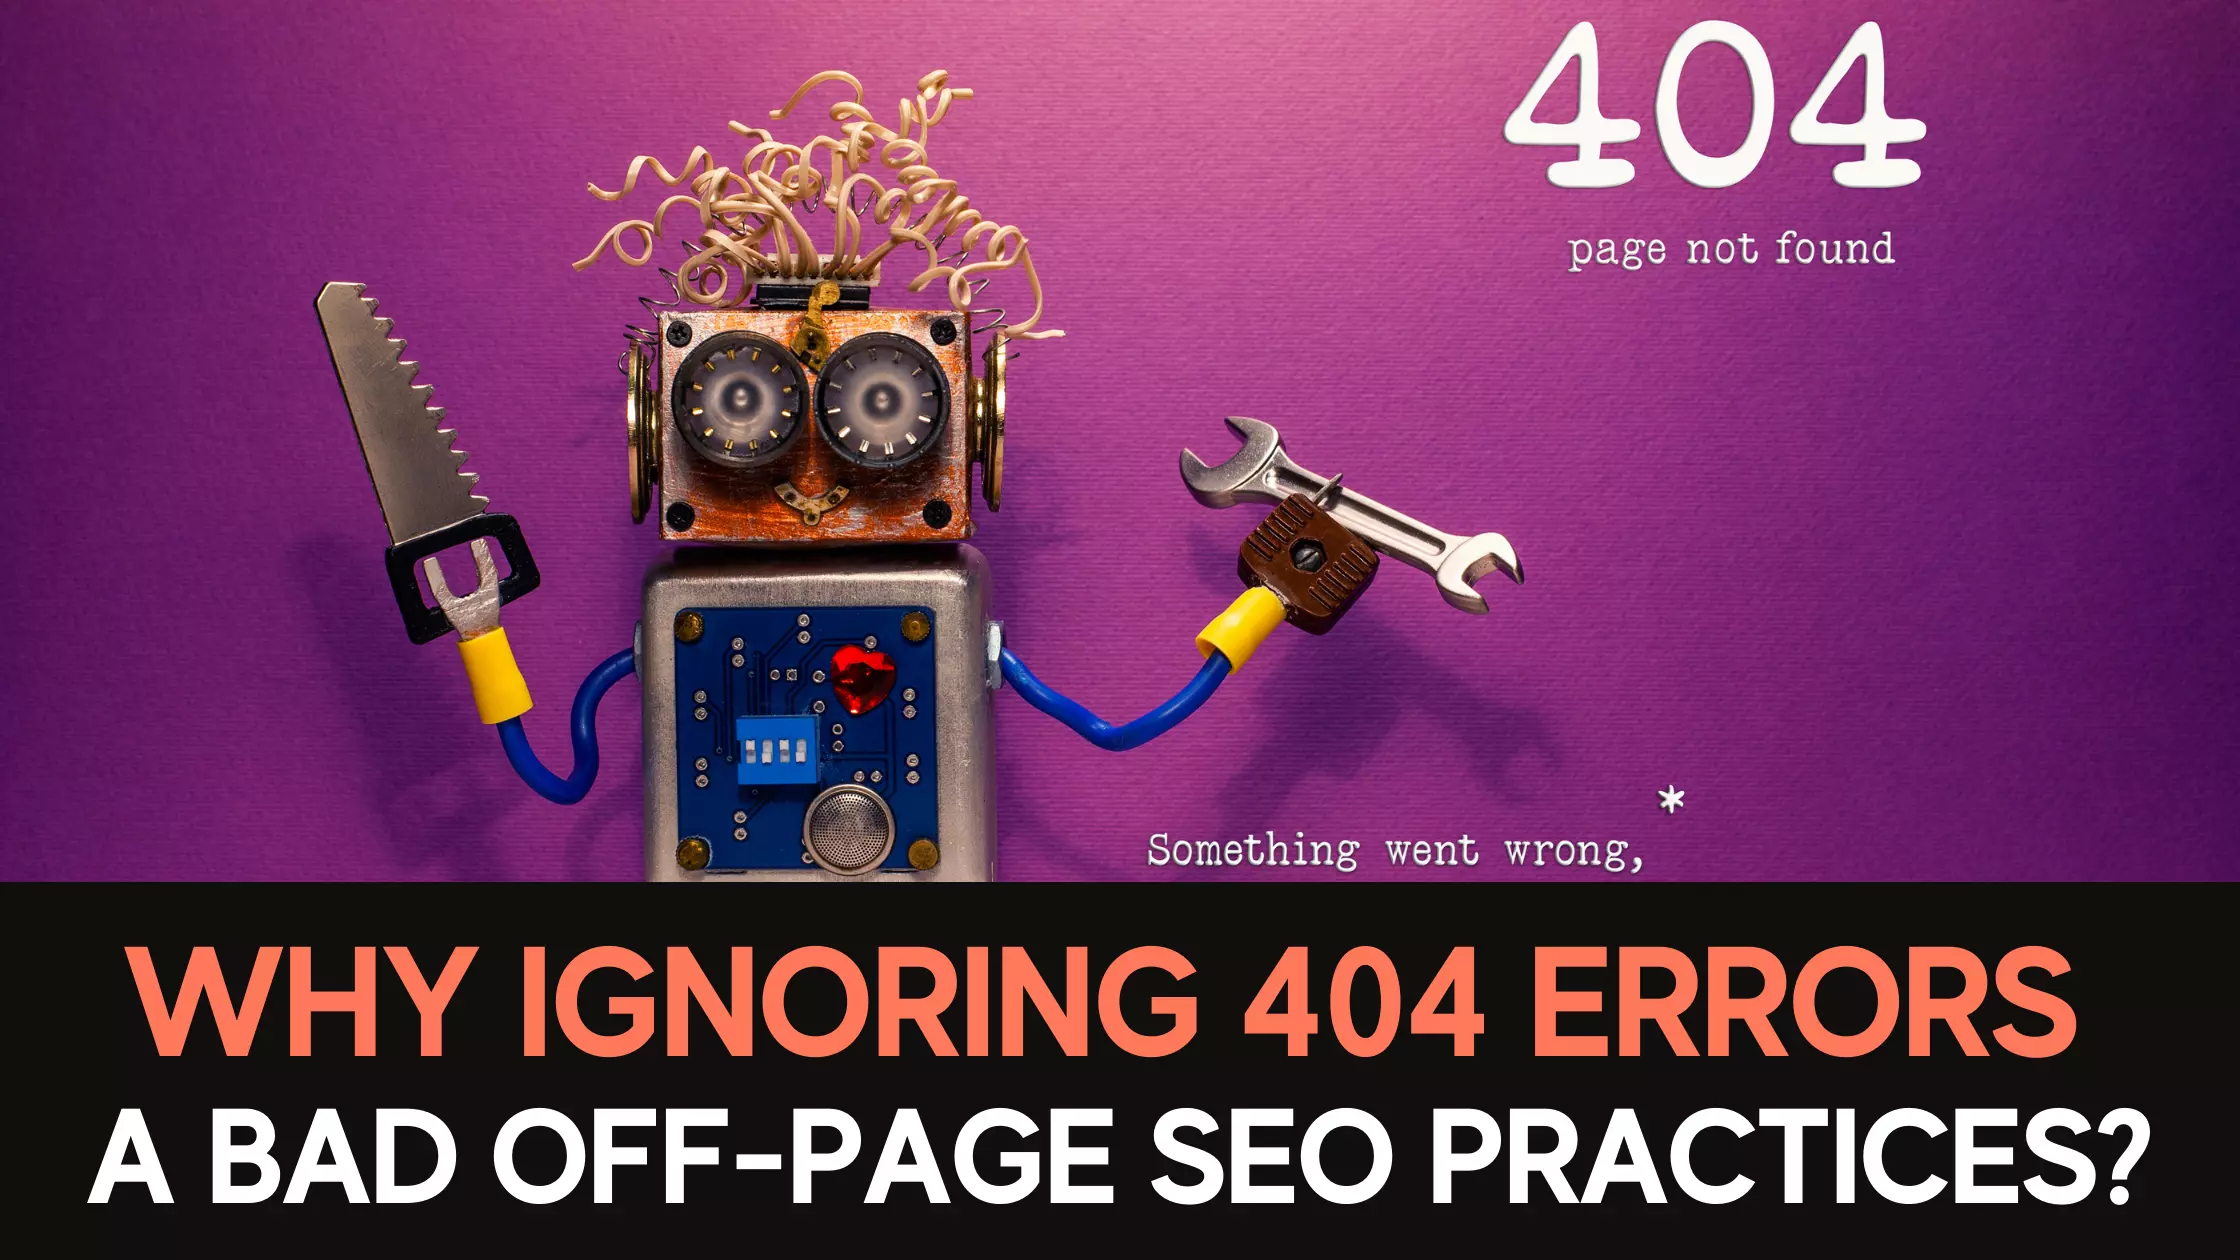 bad-off-page-seo-practices